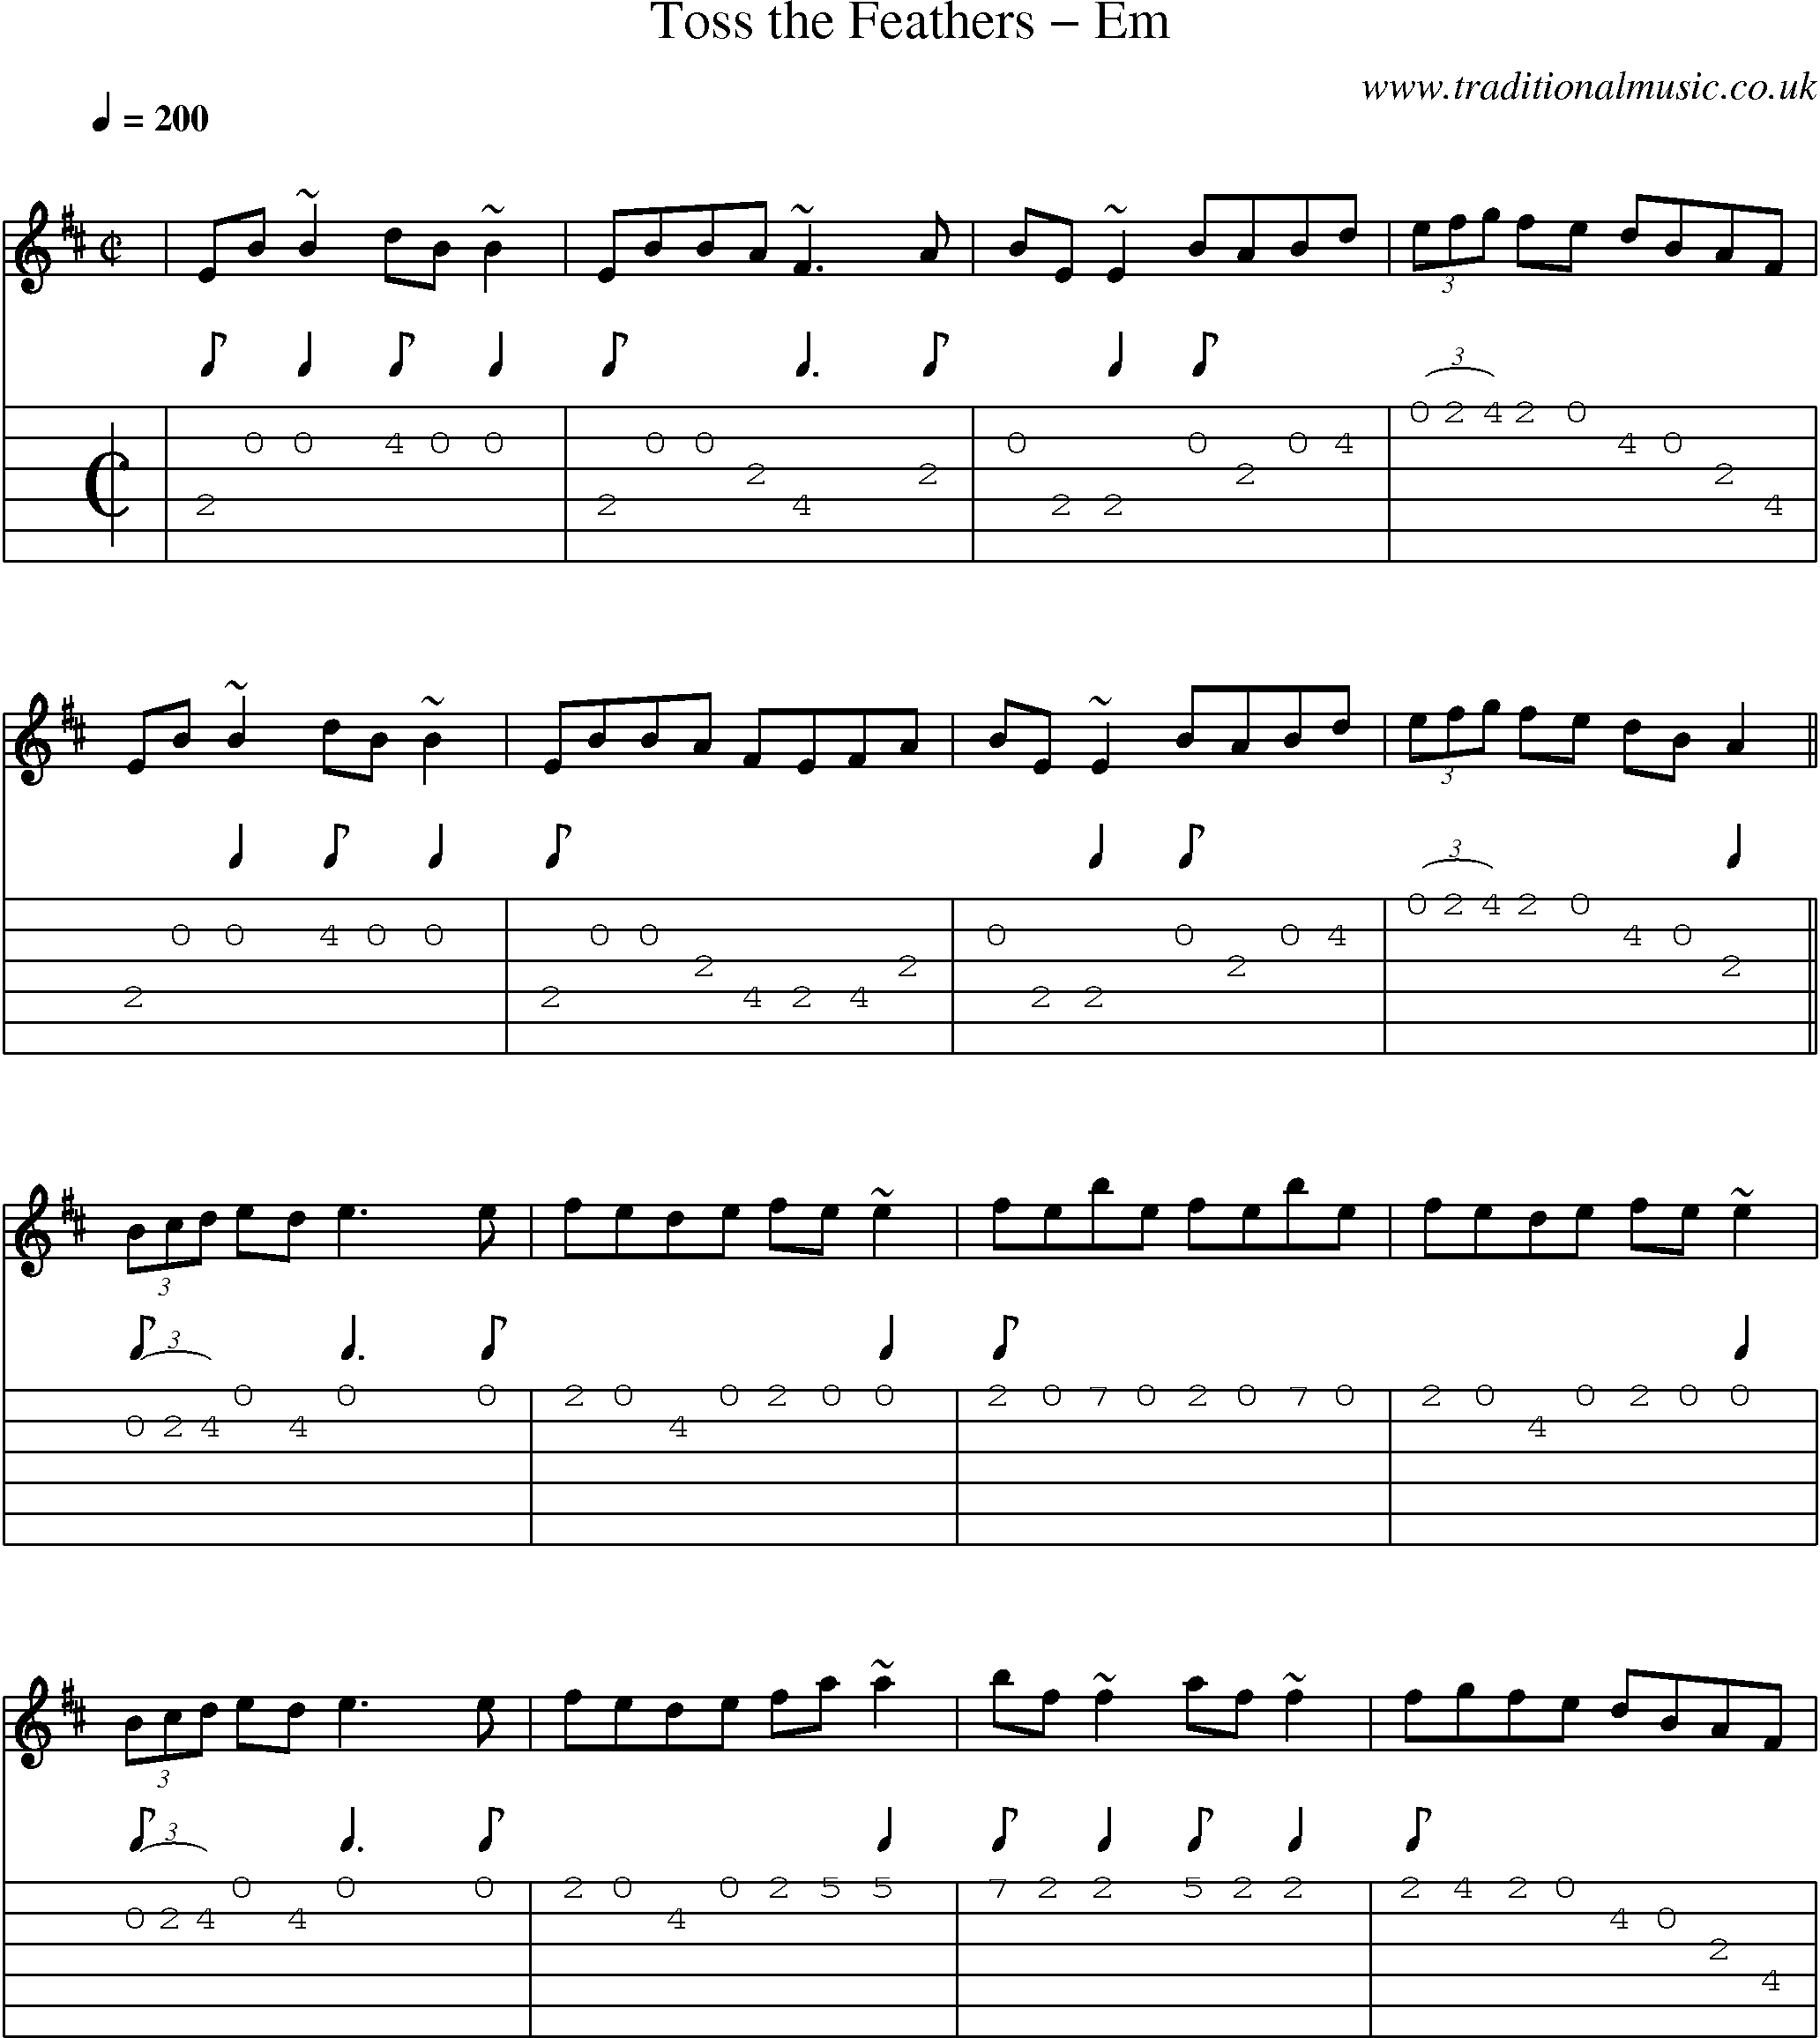 Music Score and Guitar Tabs for Toss Feathers Em